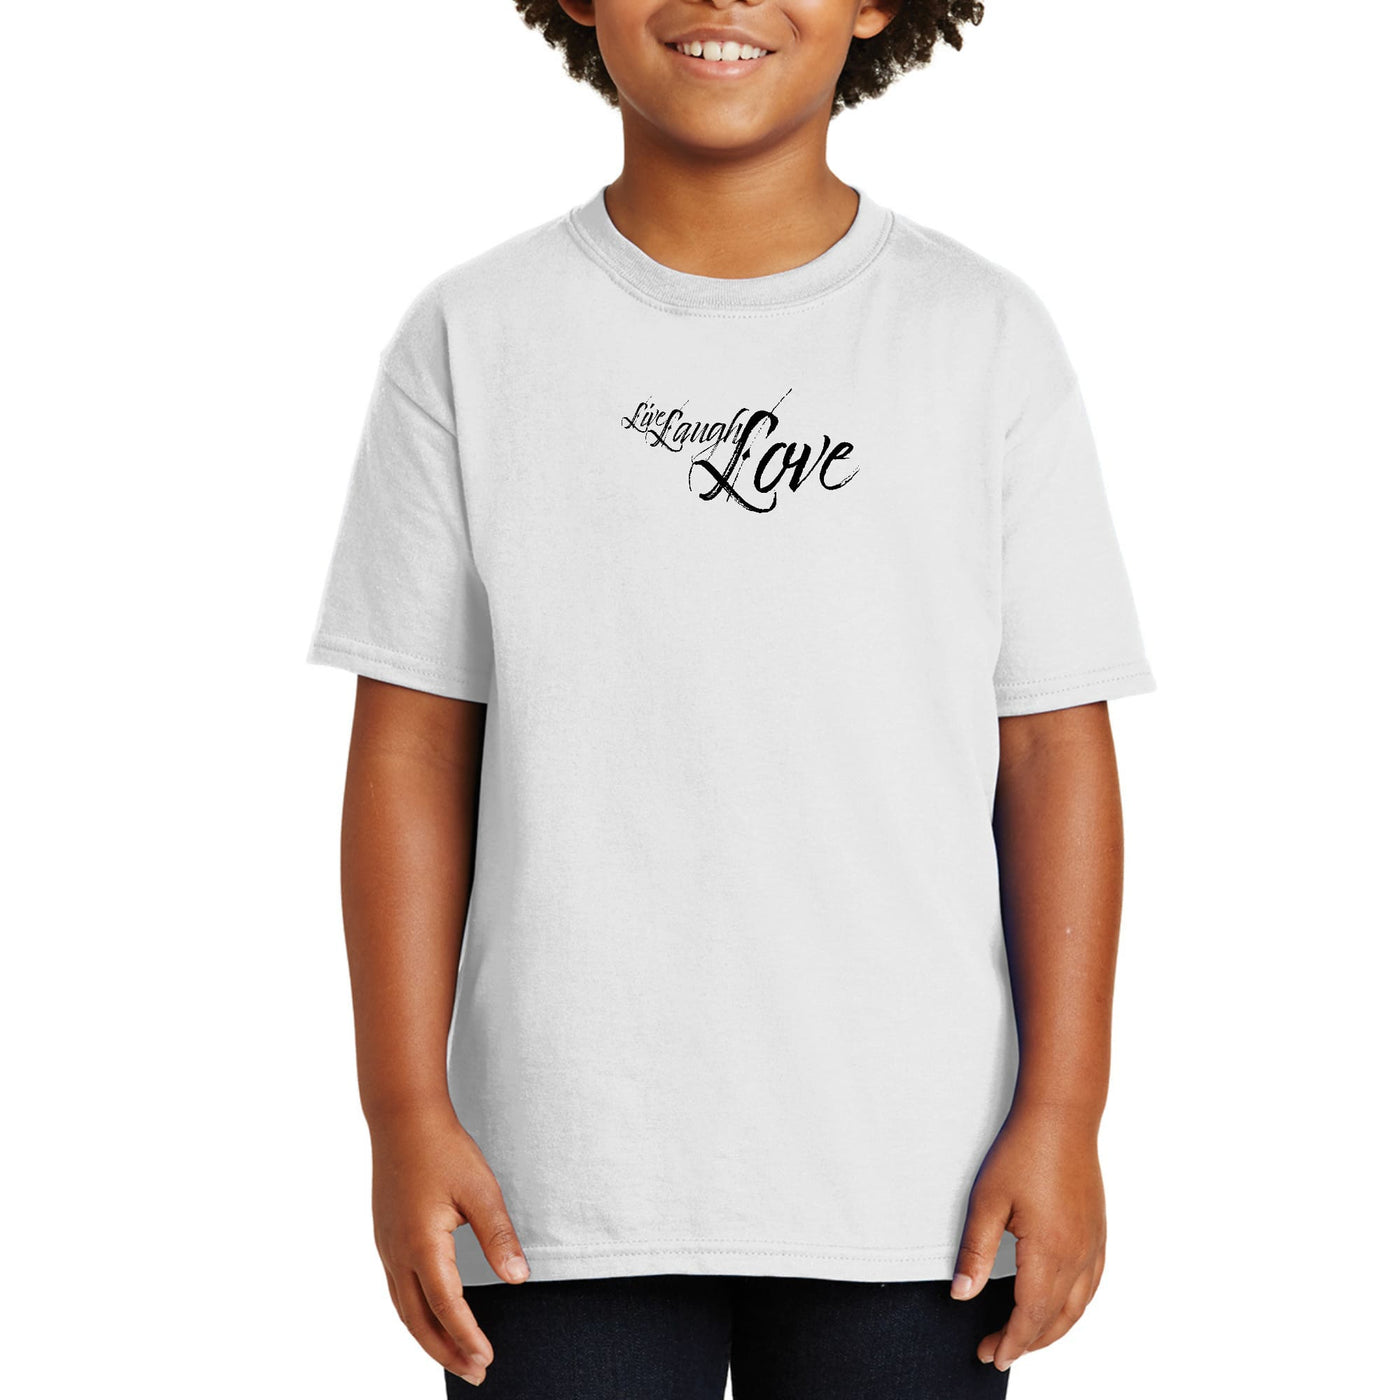 Youth Short Sleeve Graphic T-shirt Live Laugh Love Black Illustration - Youth